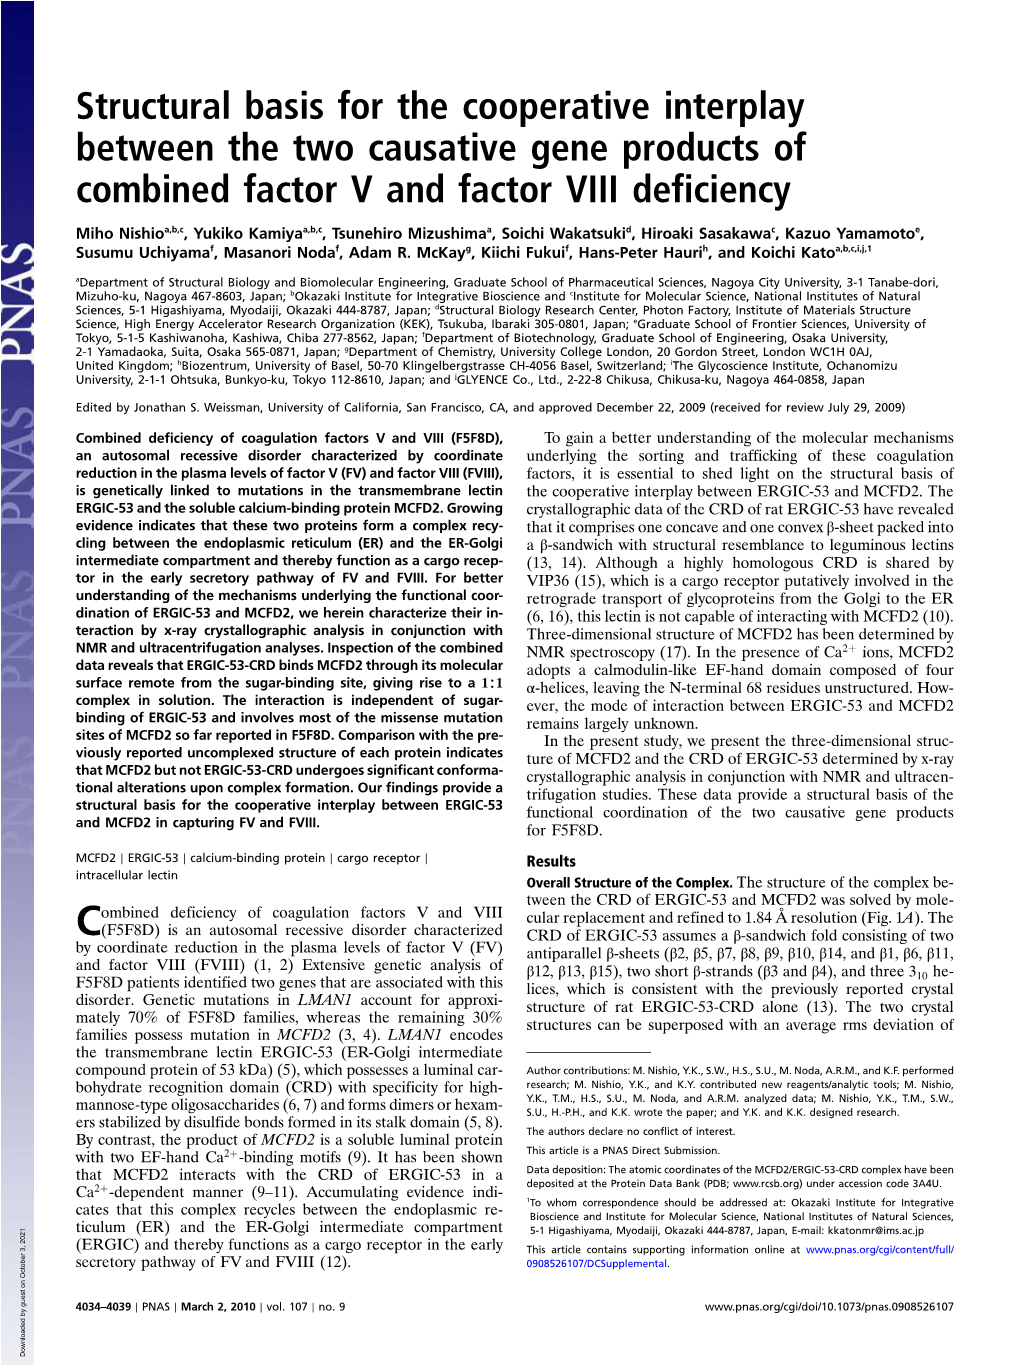 Structural Basis for the Cooperative Interplay Between the Two Causative Gene Products of Combined Factor V and Factor VIII Deficiency